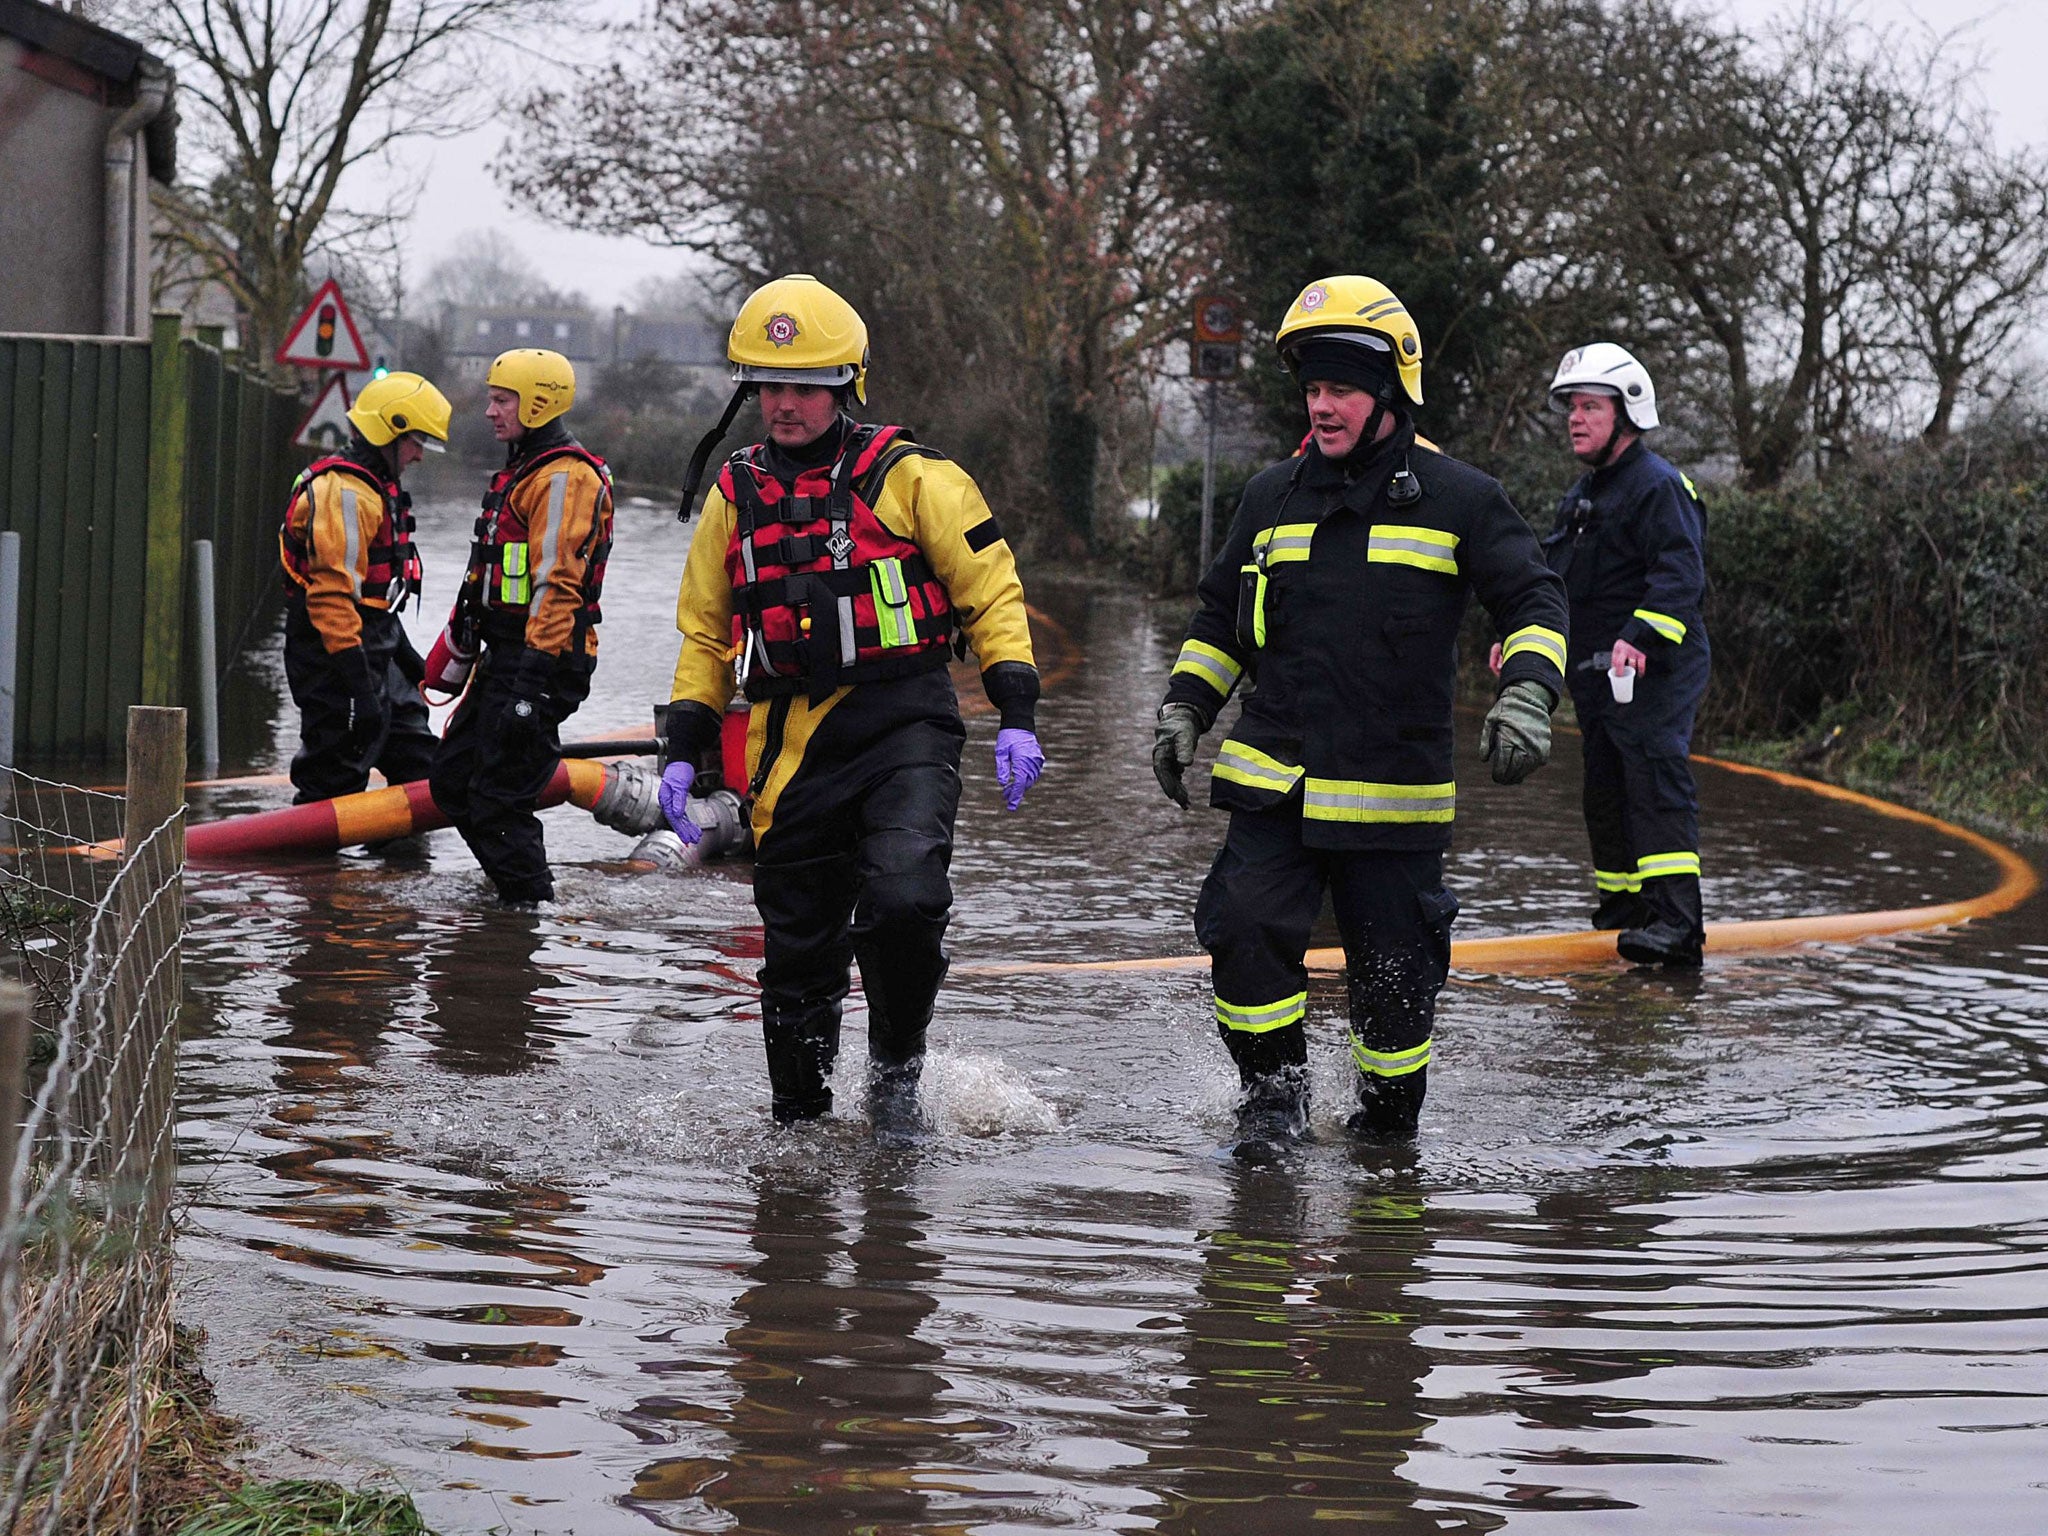 Firemen attempt to pump water off a flooded road near Long Load in Somerset, south west England on January 30, 2014